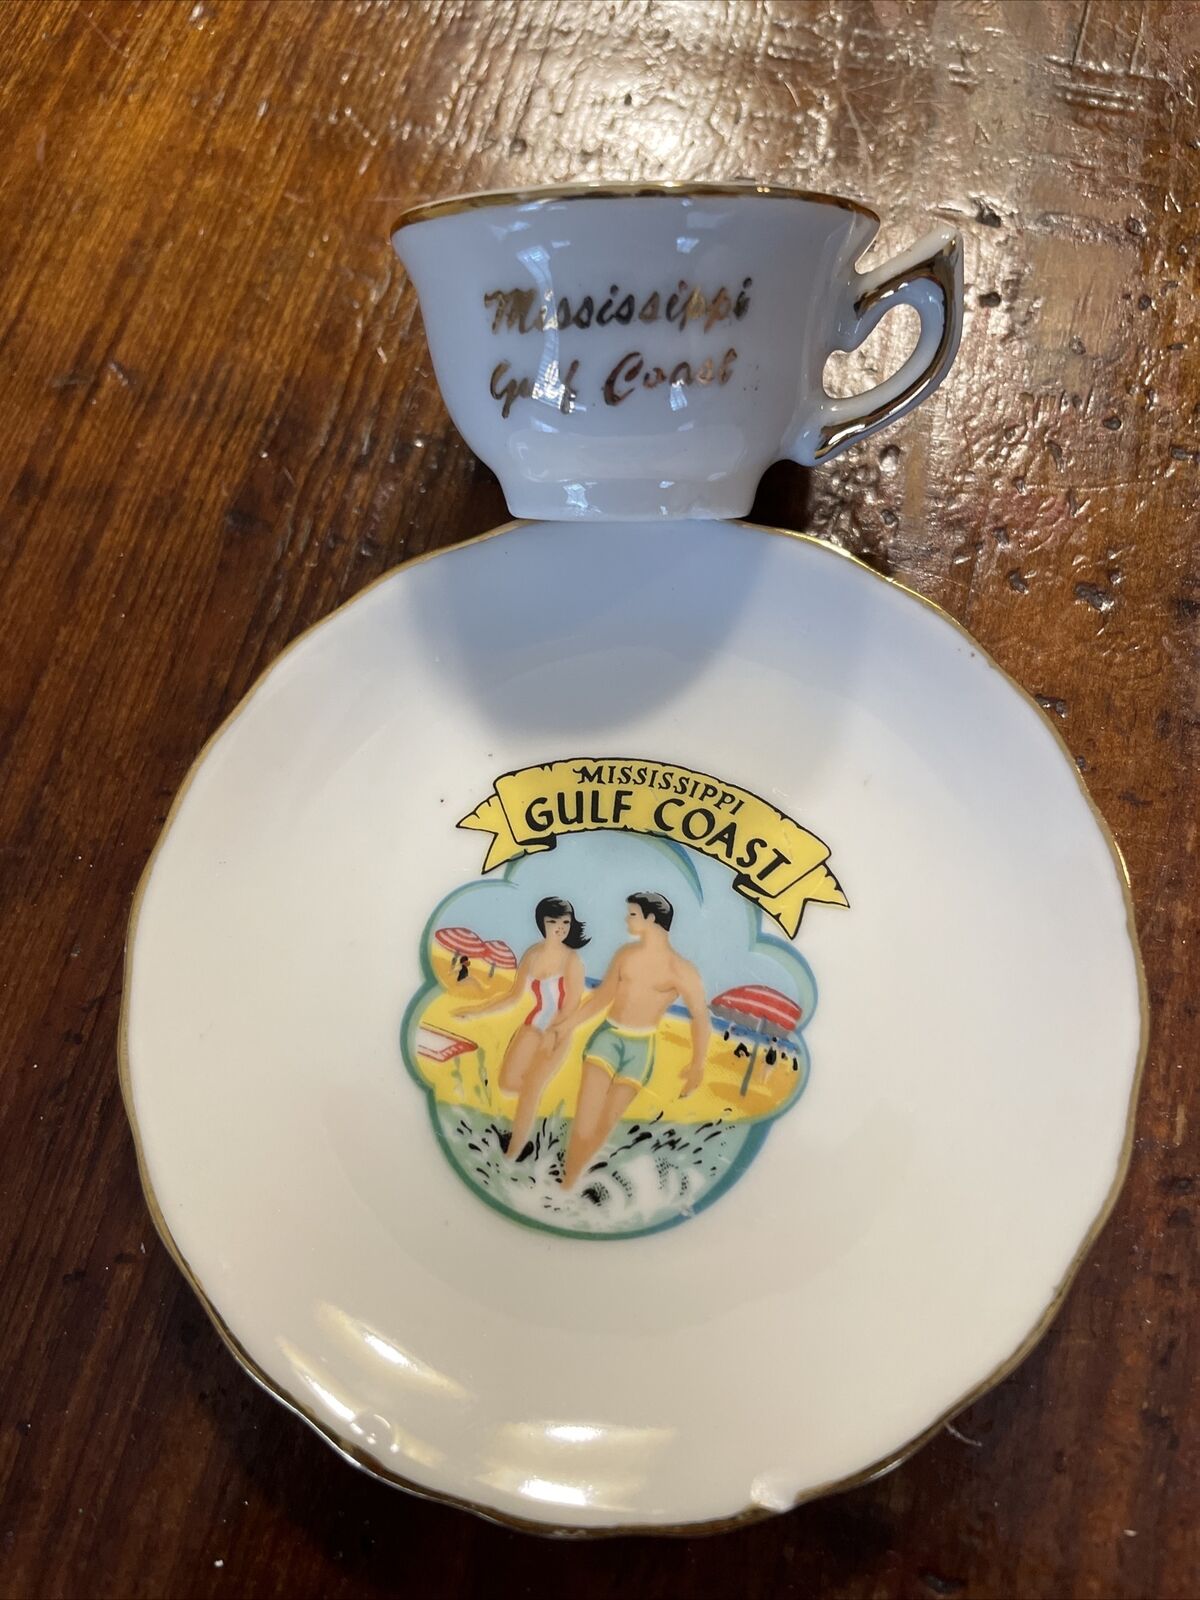 1970s Era Mississippi Gulf Coast Souvenir Mini Cup And Saucer - With Small Chip